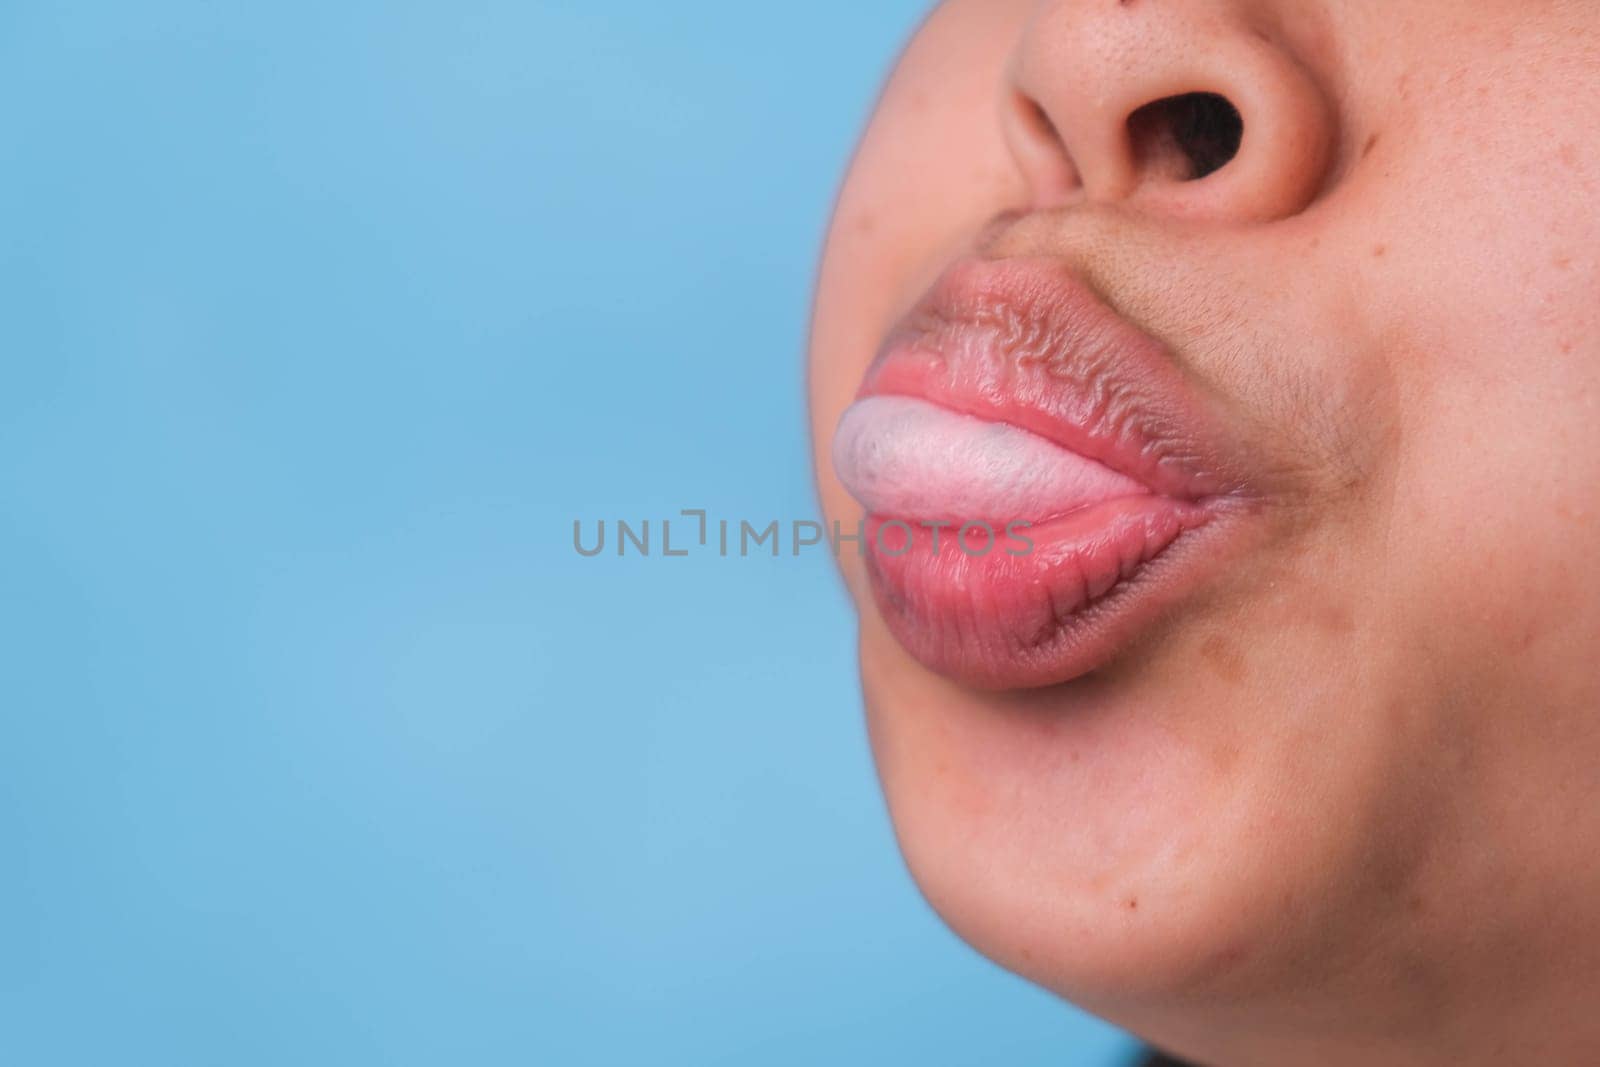 Young woman chewing gum and blowing bubble gum on blue background. by TEERASAK